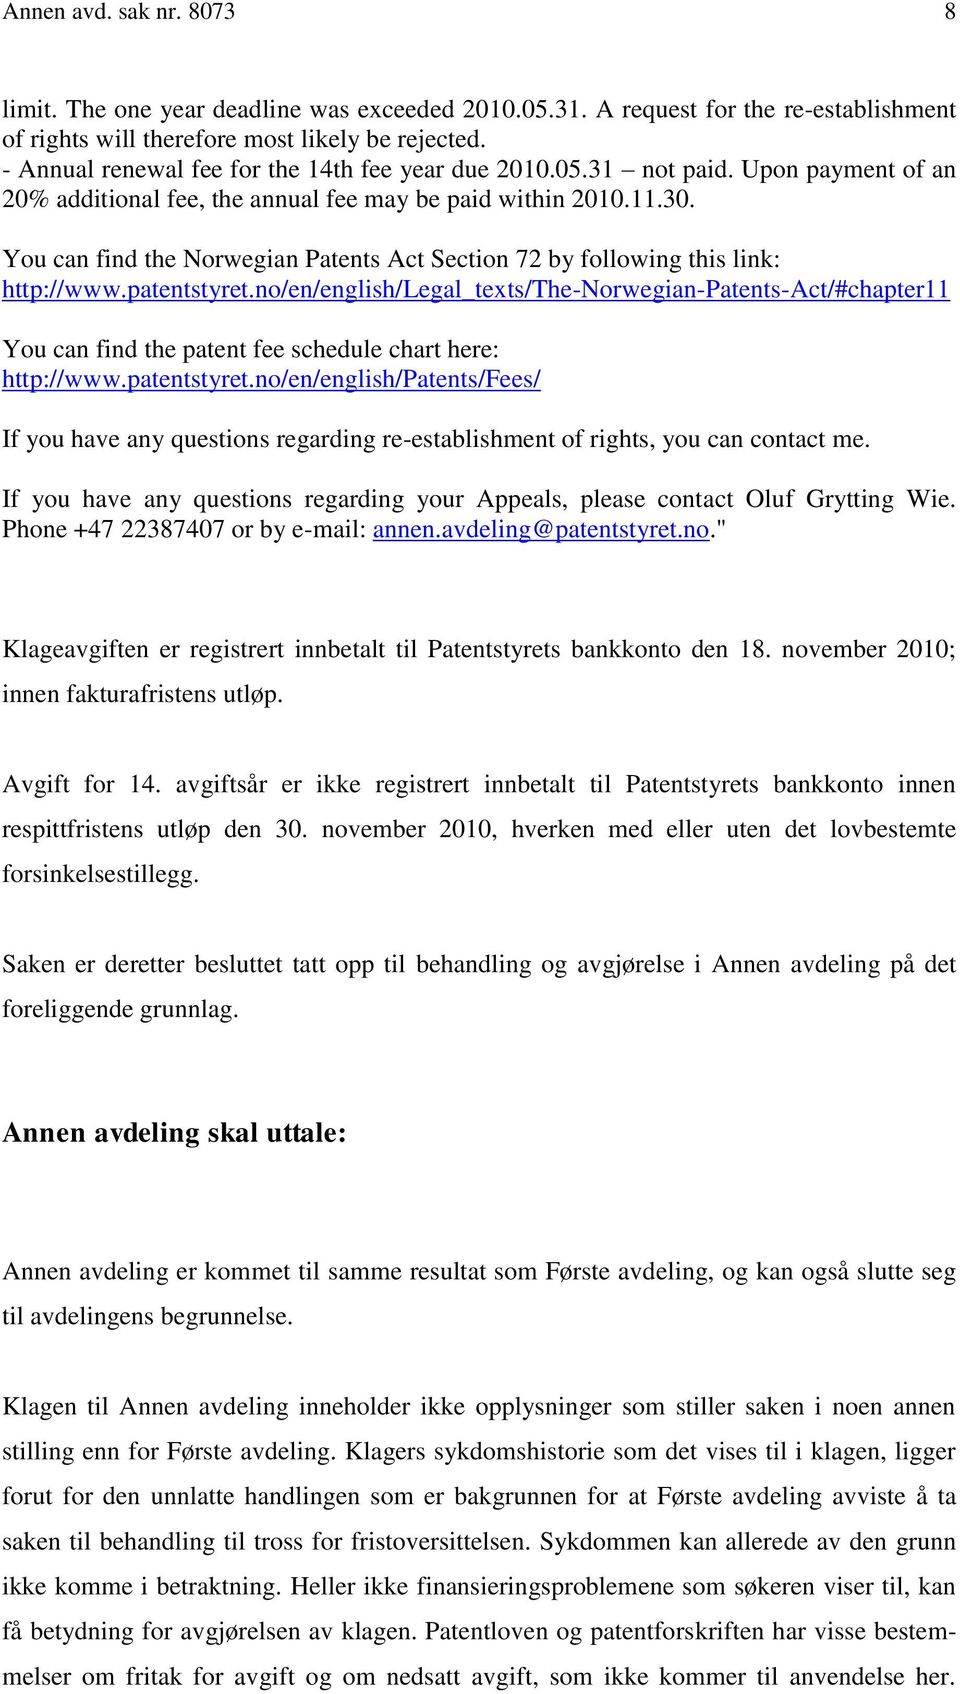 You can find the Norwegian Patents Act Section 72 by following this link: http://www.patentstyret.